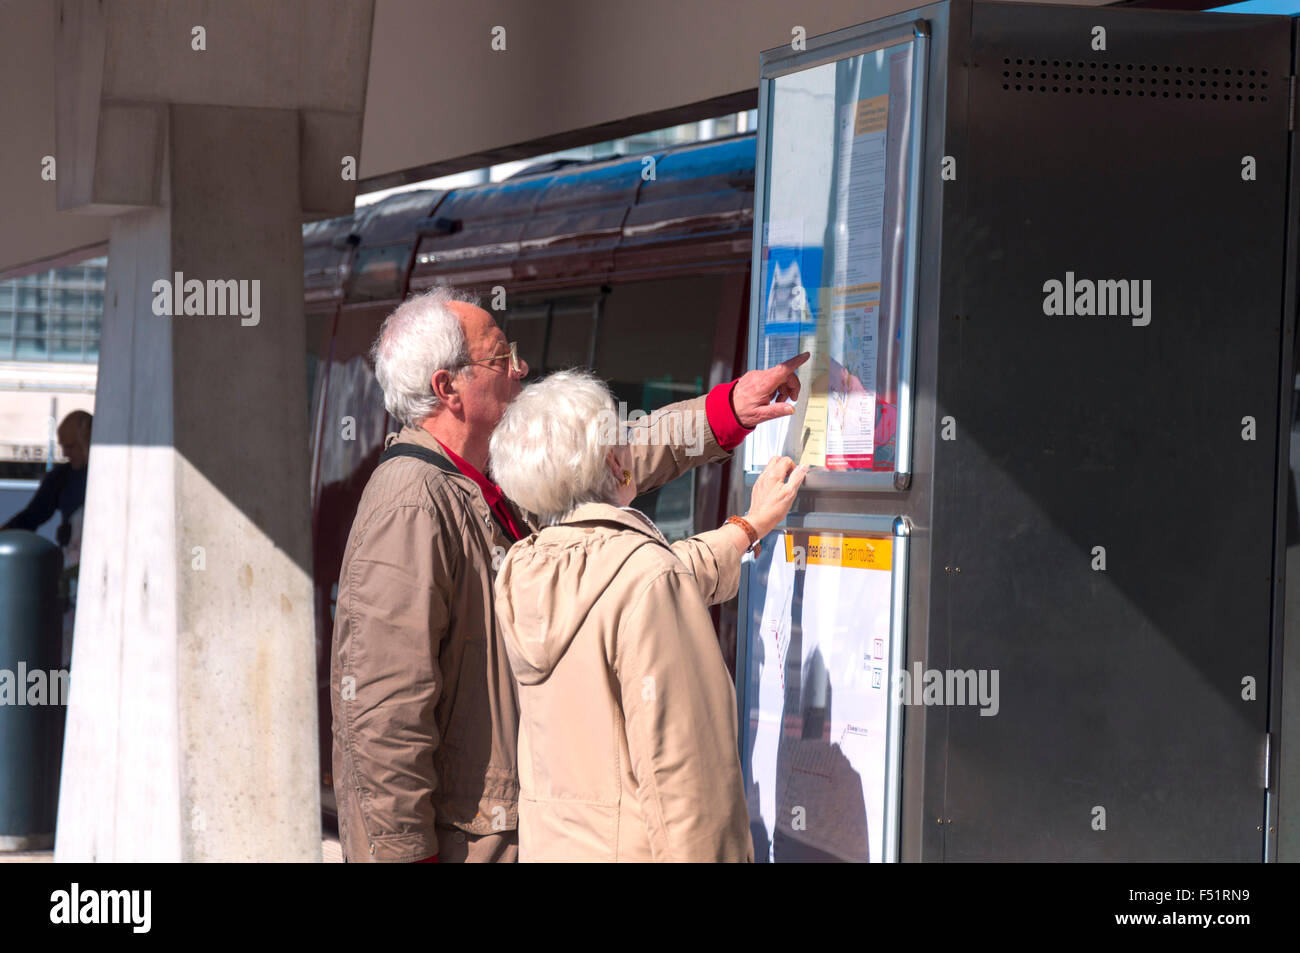 Elderly senior couple consult timetable for Actv tram in piazzale Roma, Venice, Italy Stock Photo